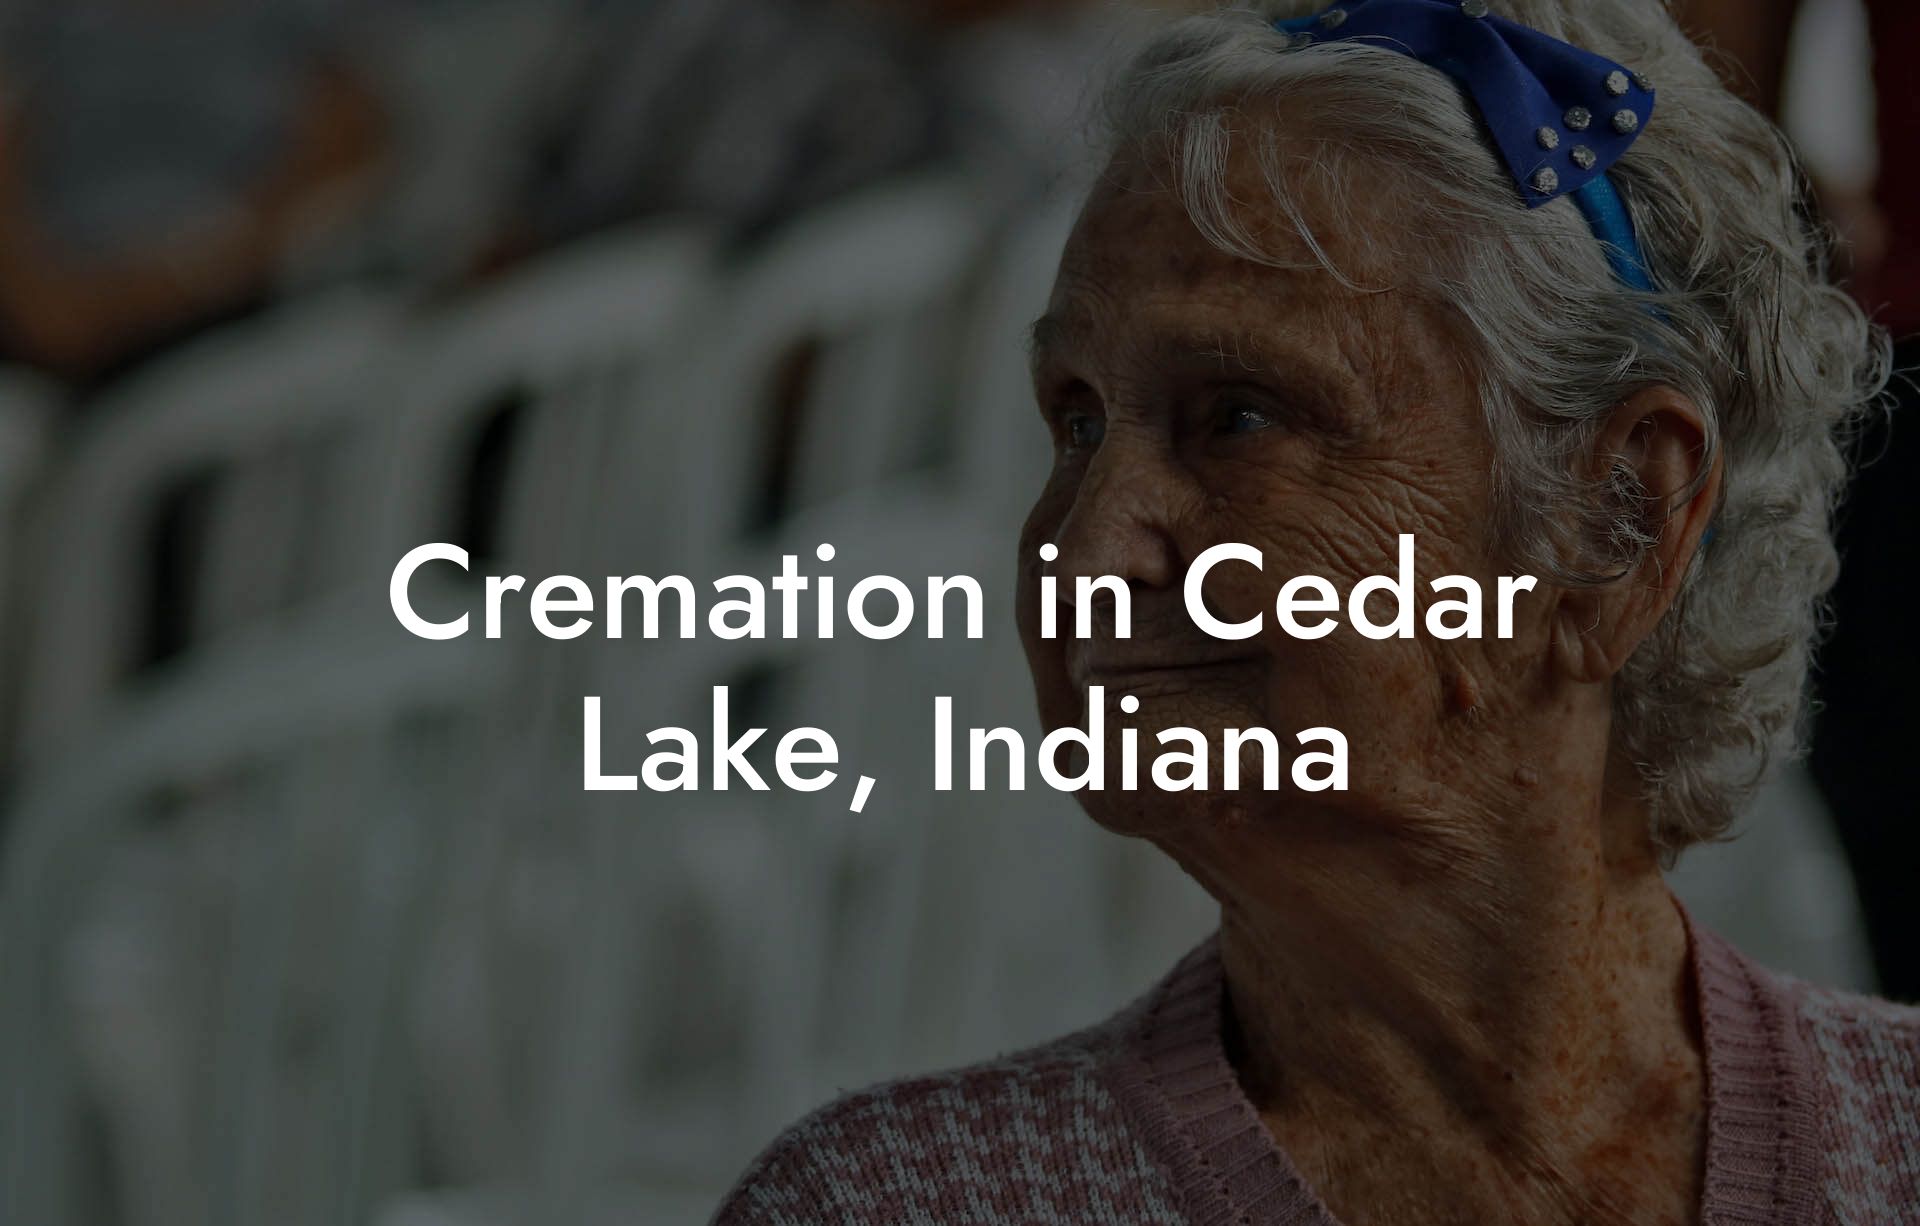 Cremation in Cedar Lake, Indiana